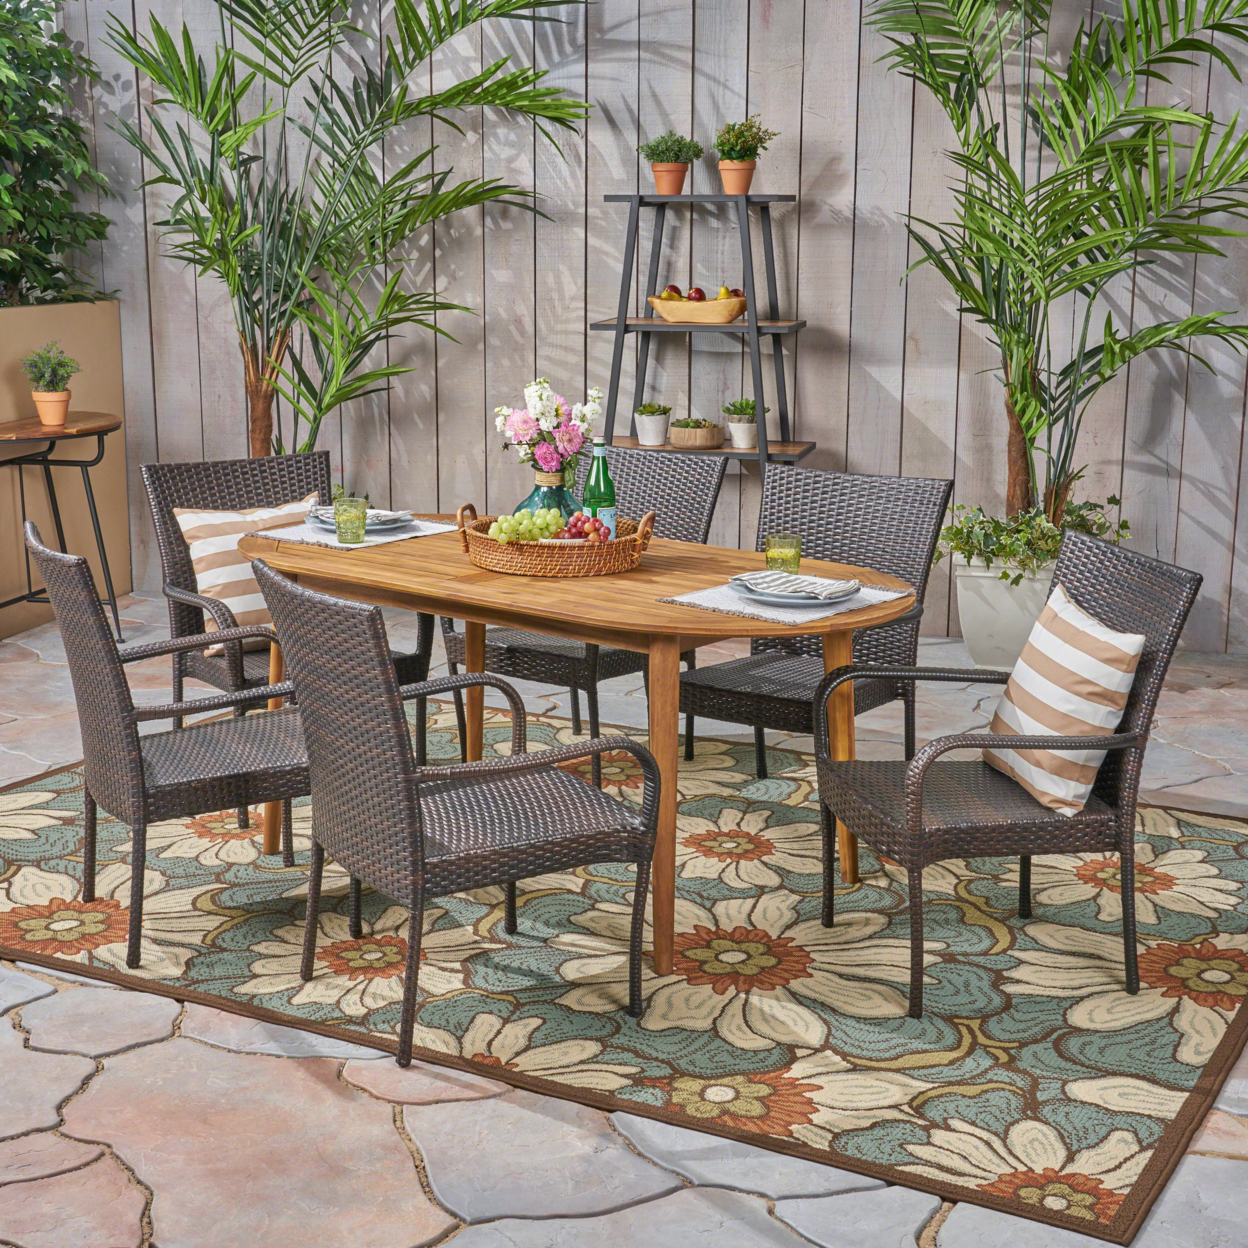 Elle Outdoor 7 Piece Acacia Wood Dining Set With Stacking Wicker Chairs - Teak Finish + Multi Brown